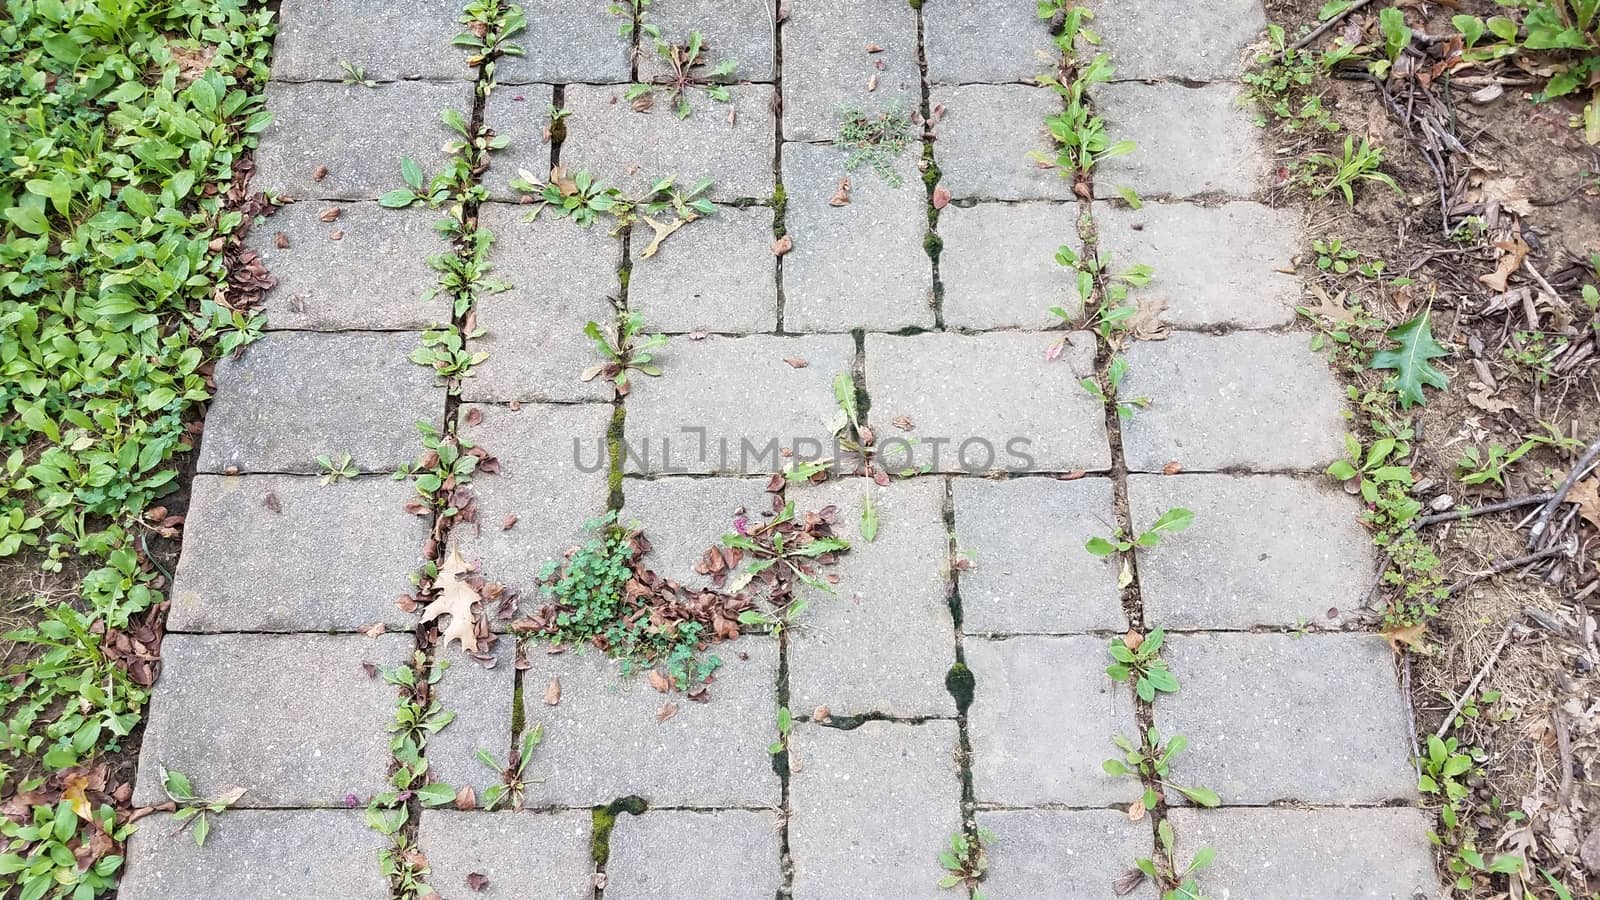 rock or stone tile path or trail with weeds in the cracks